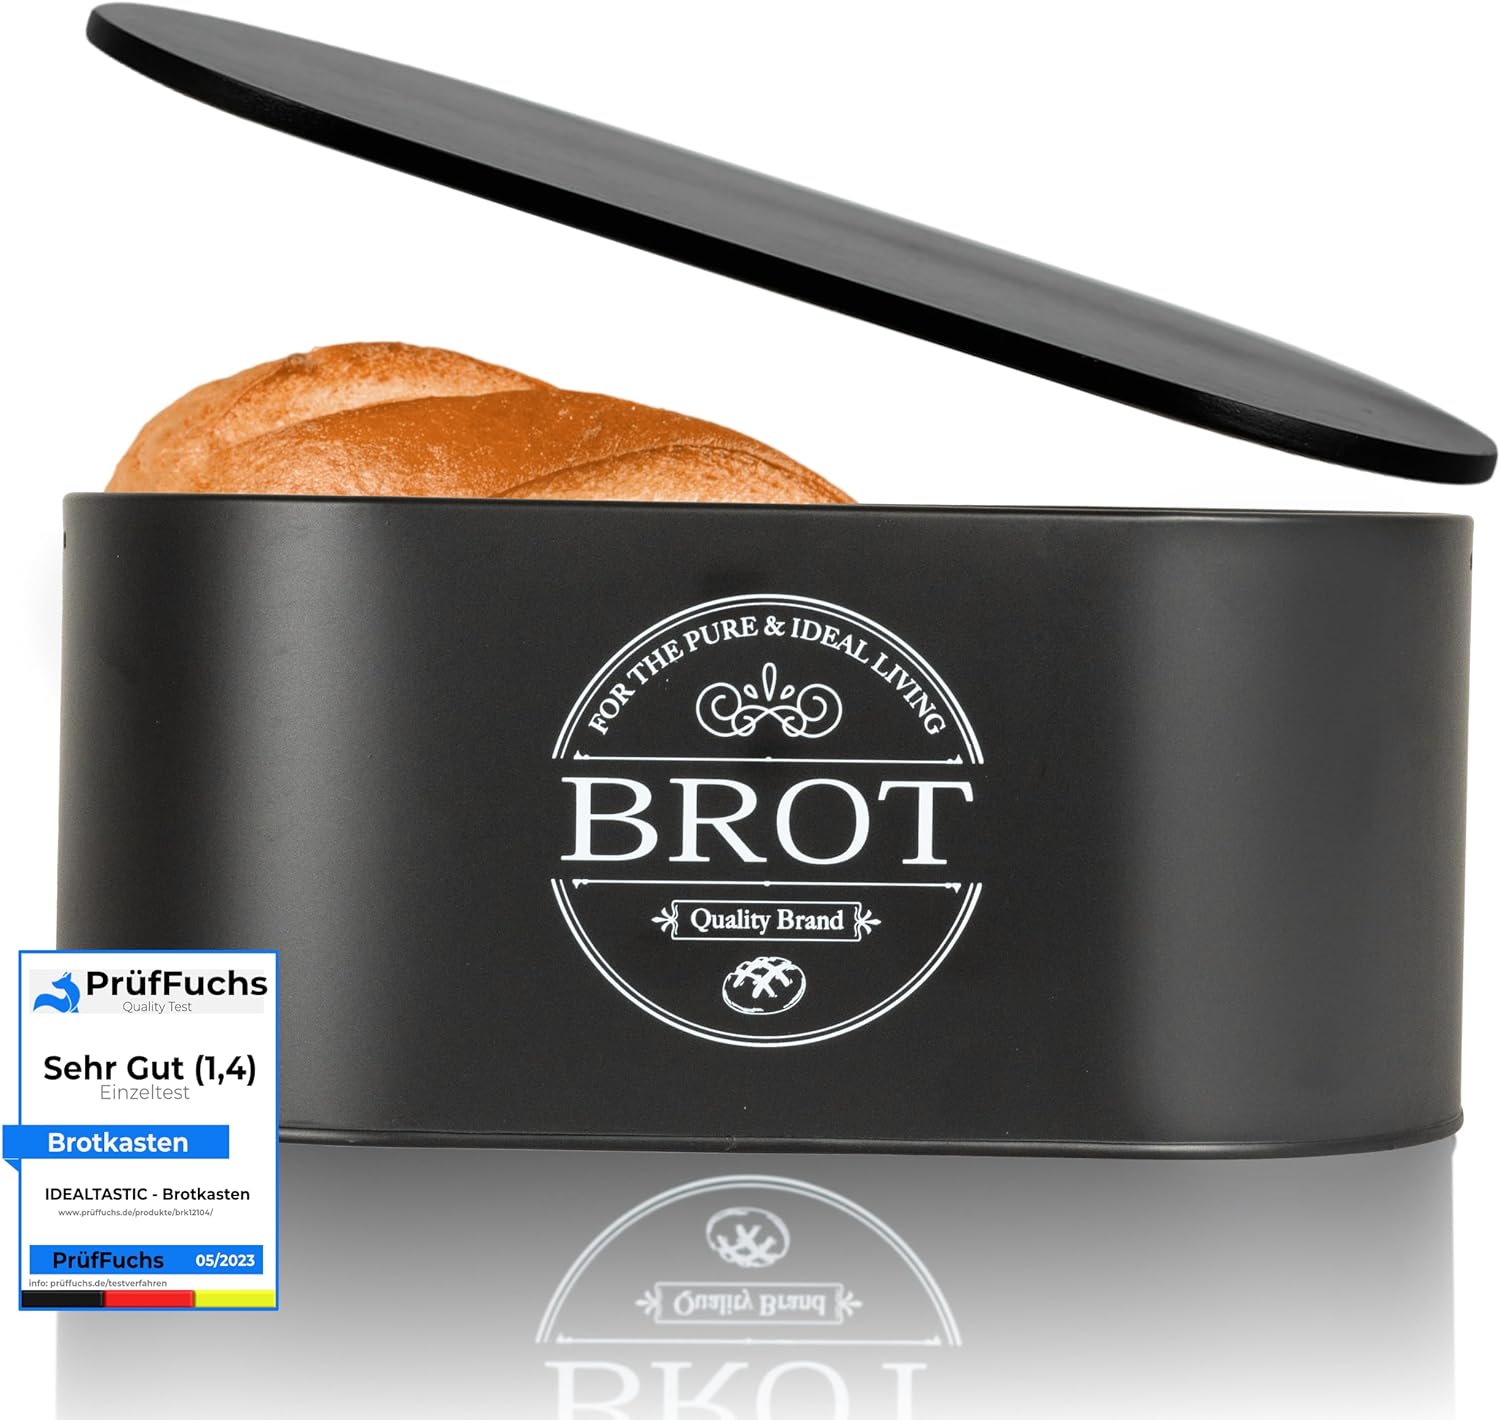 IDEALTASTIC® Premium 2-in-1 Bread Bin Black with Efficient Chopping Board Lid, Keeps Bread Box Fresh Longer with Specially Developed Air Circulation, Food-Safe Bread Storage
